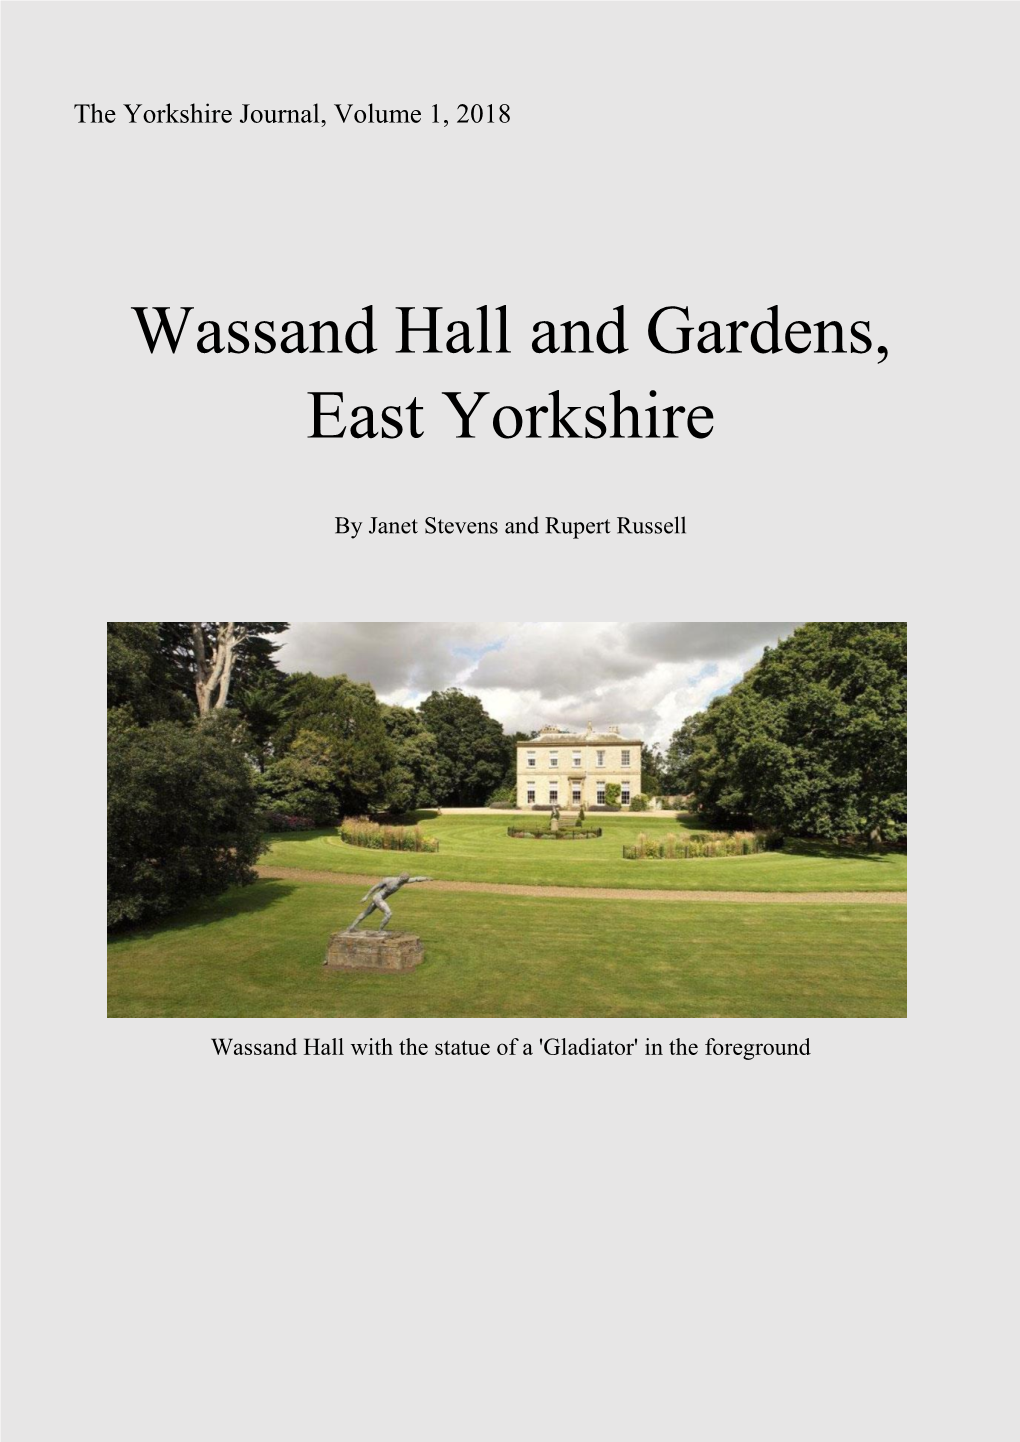 Wassand Hall and Gardens, East Yorkshire